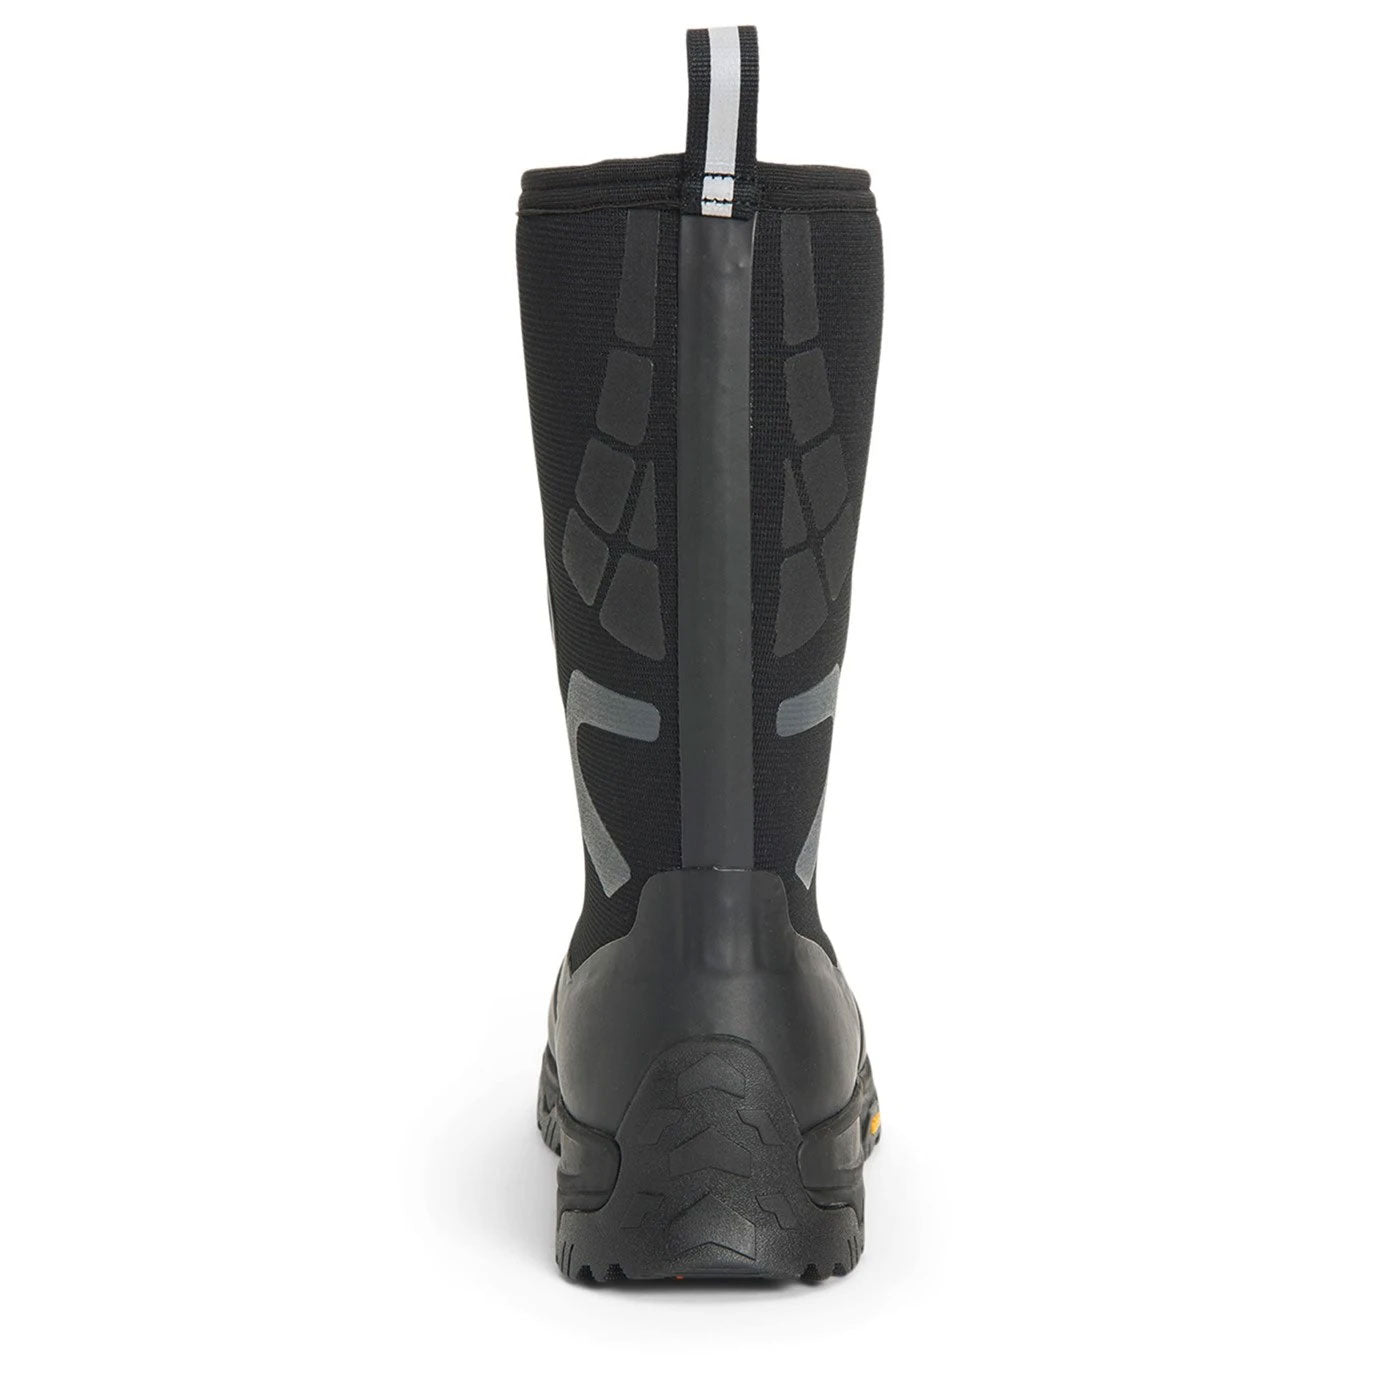 Back heel Apex Pro AG All Terrain Short Boots by The Original Muck Boot Company 